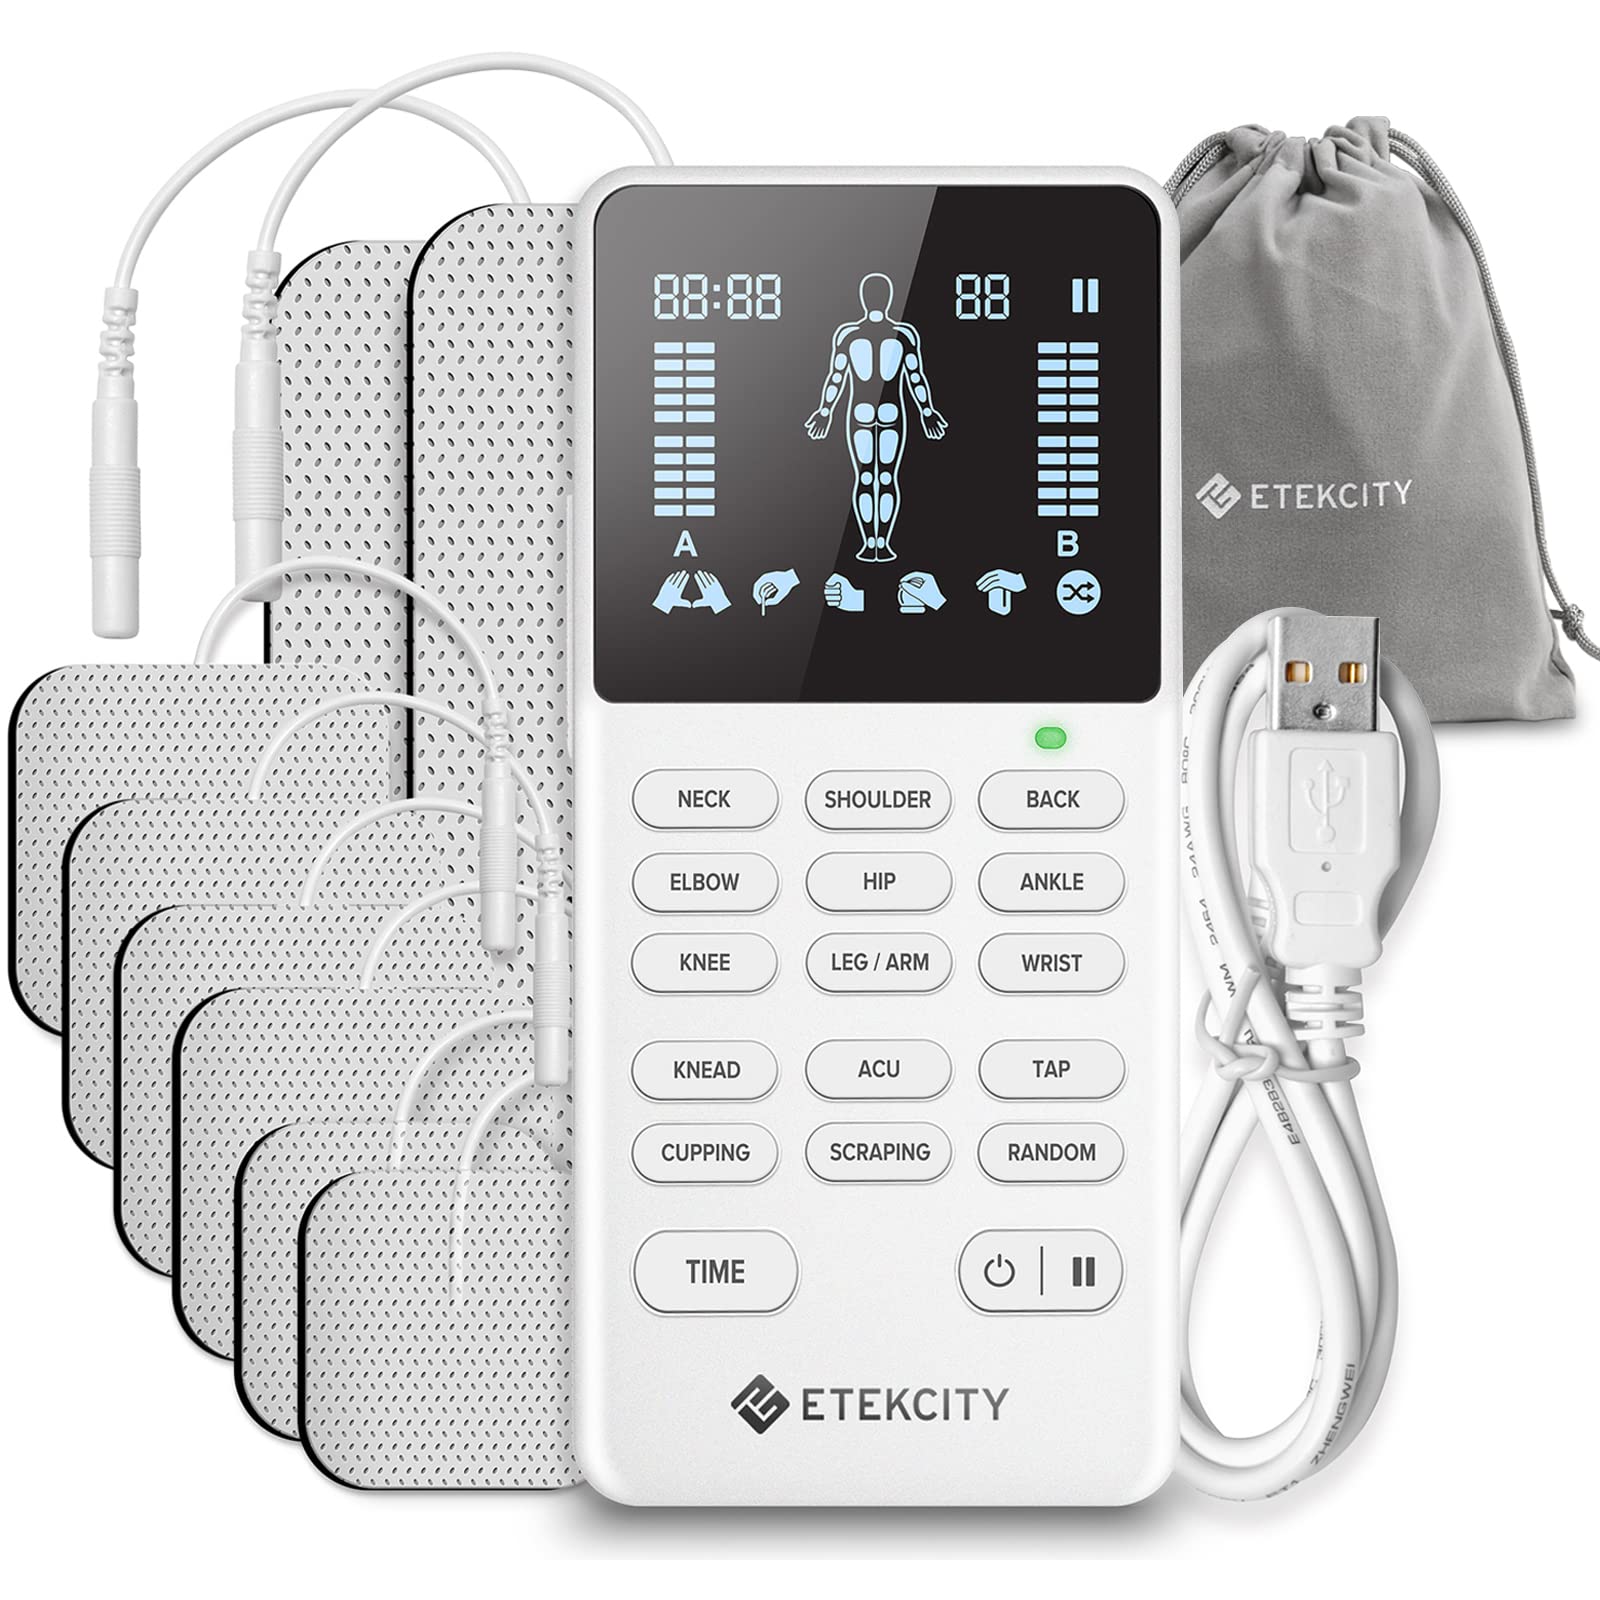 Etekcity TENS Unit Muscle Stimulator Machine with Replacement Pads for Pain  Relief Multi-Modes, FSA HSA Approved Products, FDA Cleared 4 Channels